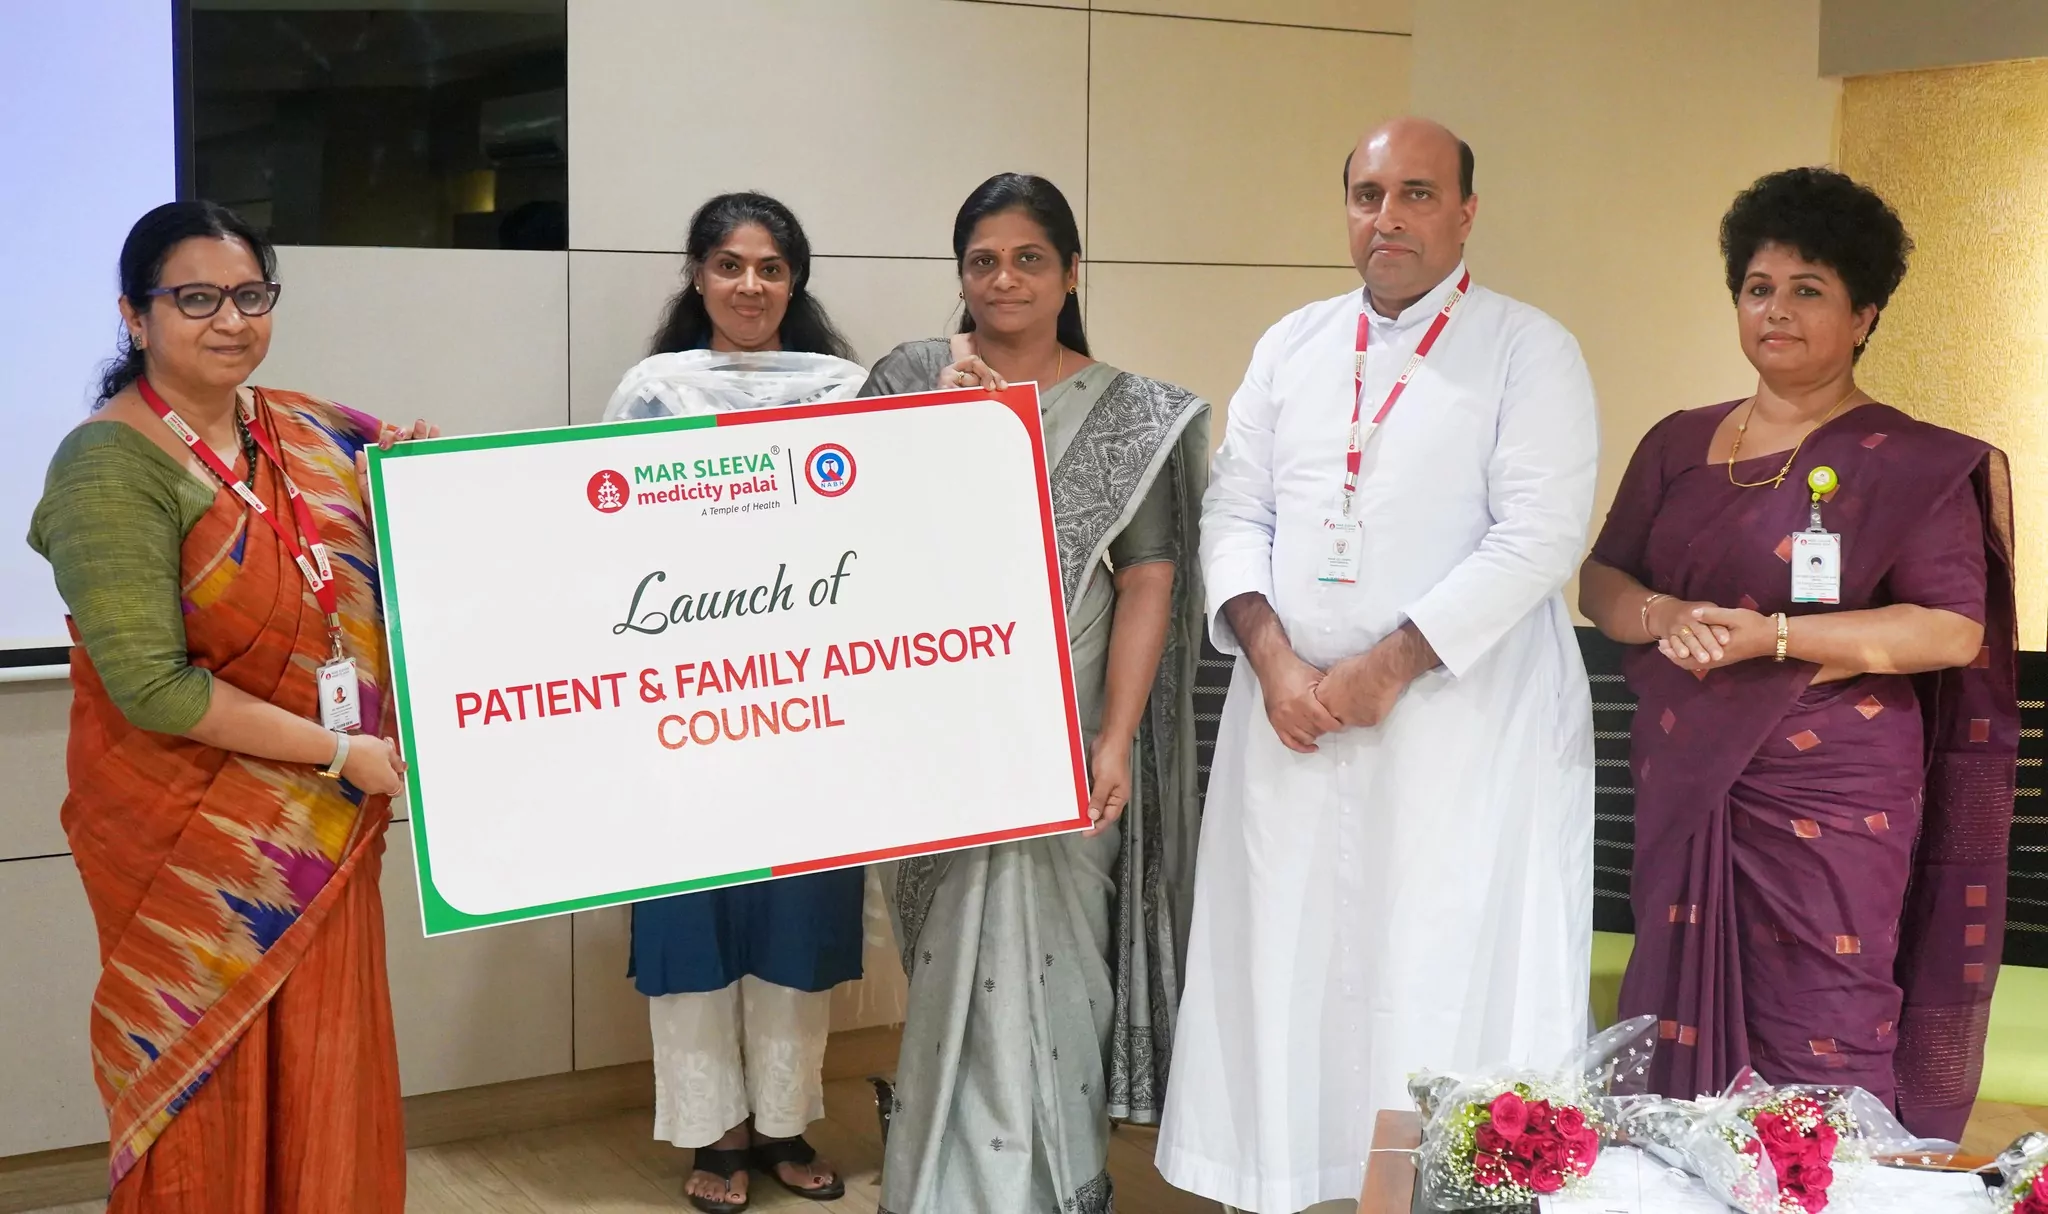 Exhibition on Patient Safety Initiatives & Launch of Patient and Family Advisory Council.